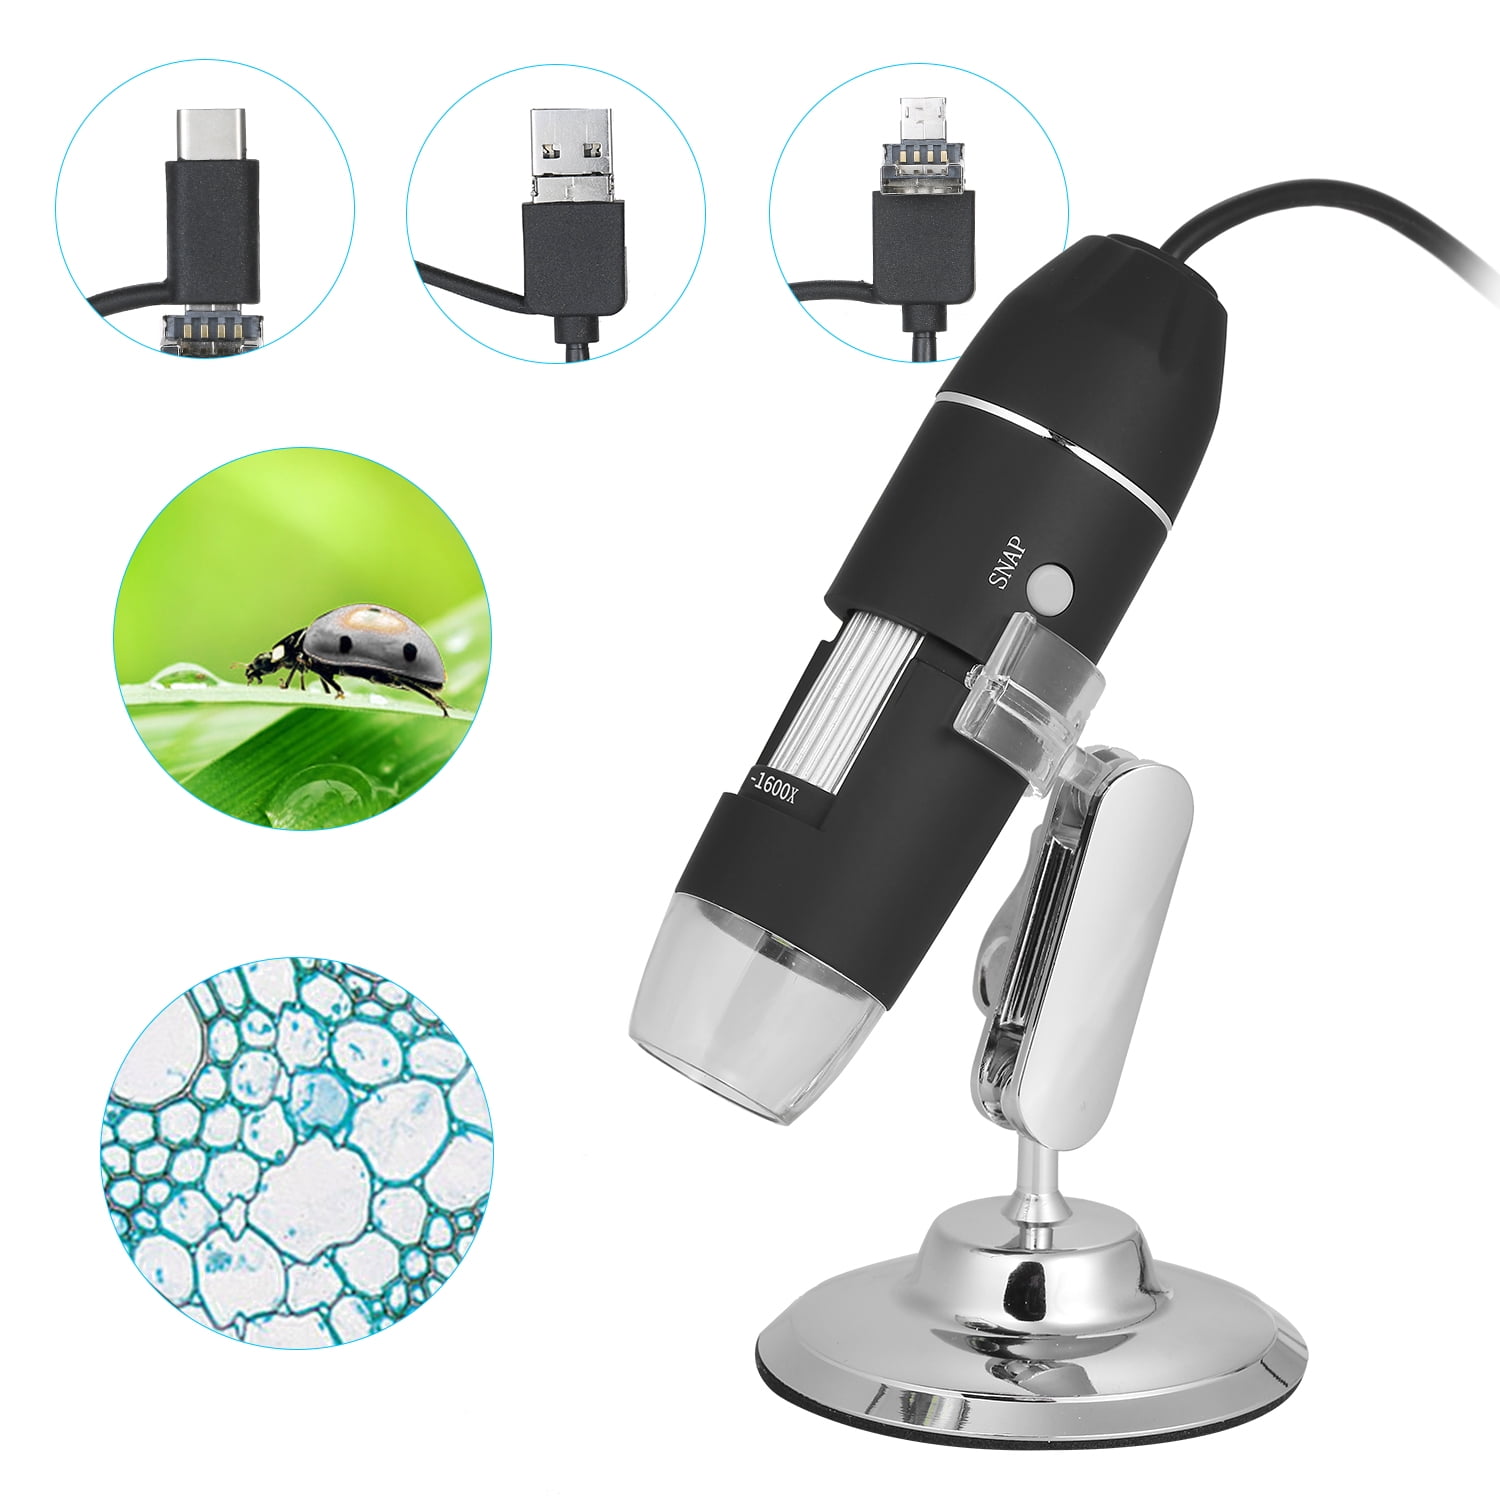 1600X HD Digital Microscope Magnifier Handheld USB Microscope with Metal Stand